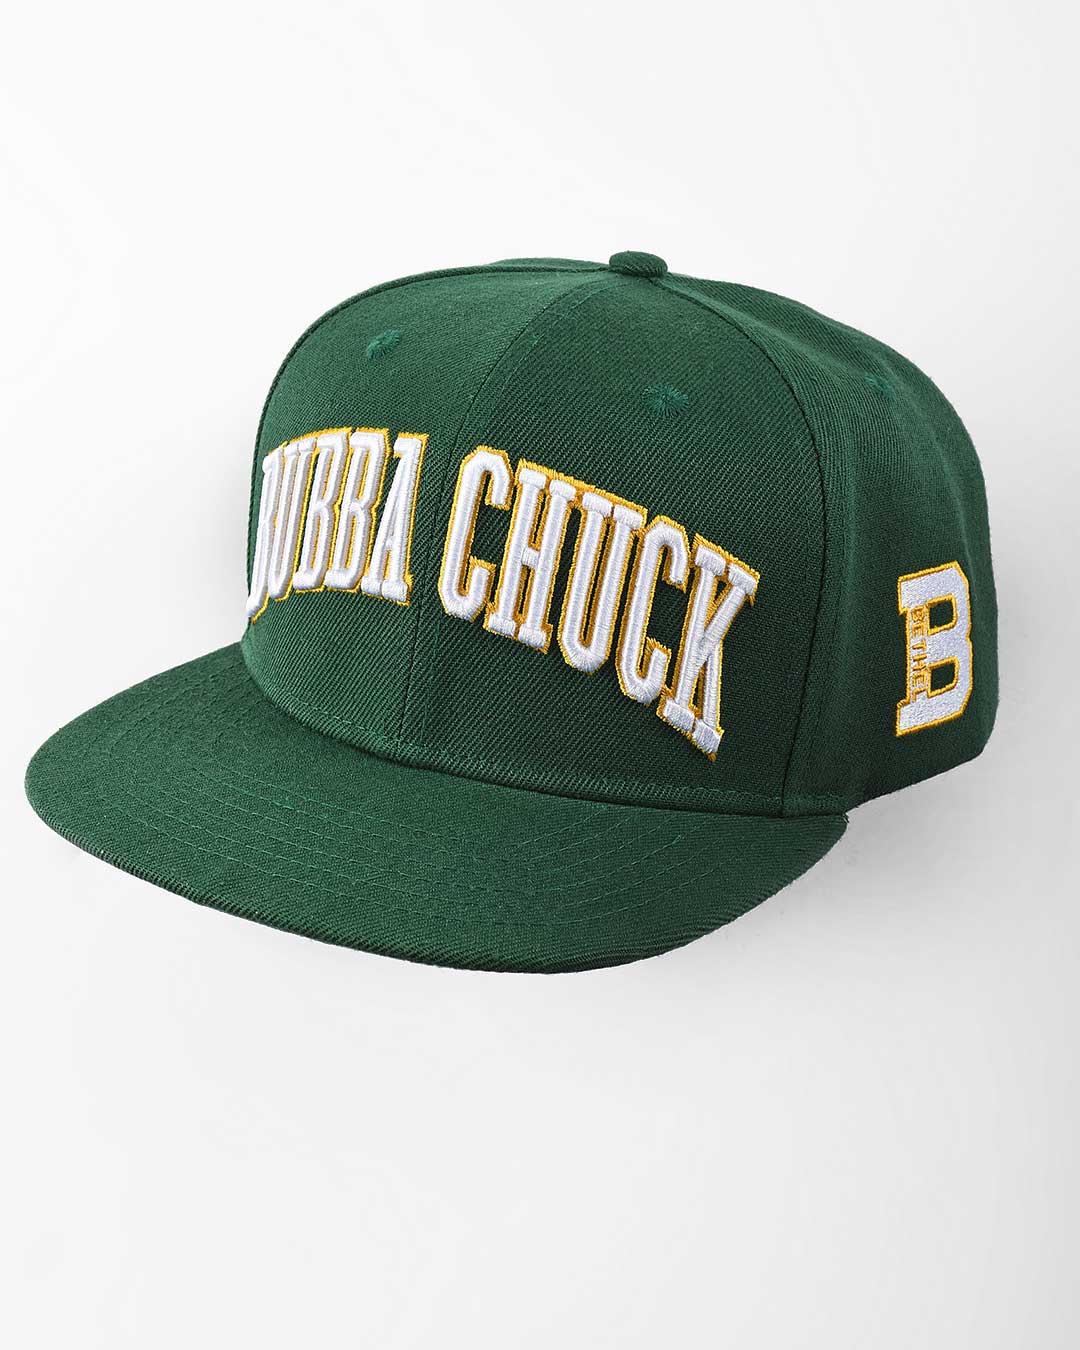 Iverson Bubba Chuck Snapback Hat - Roots of Fight